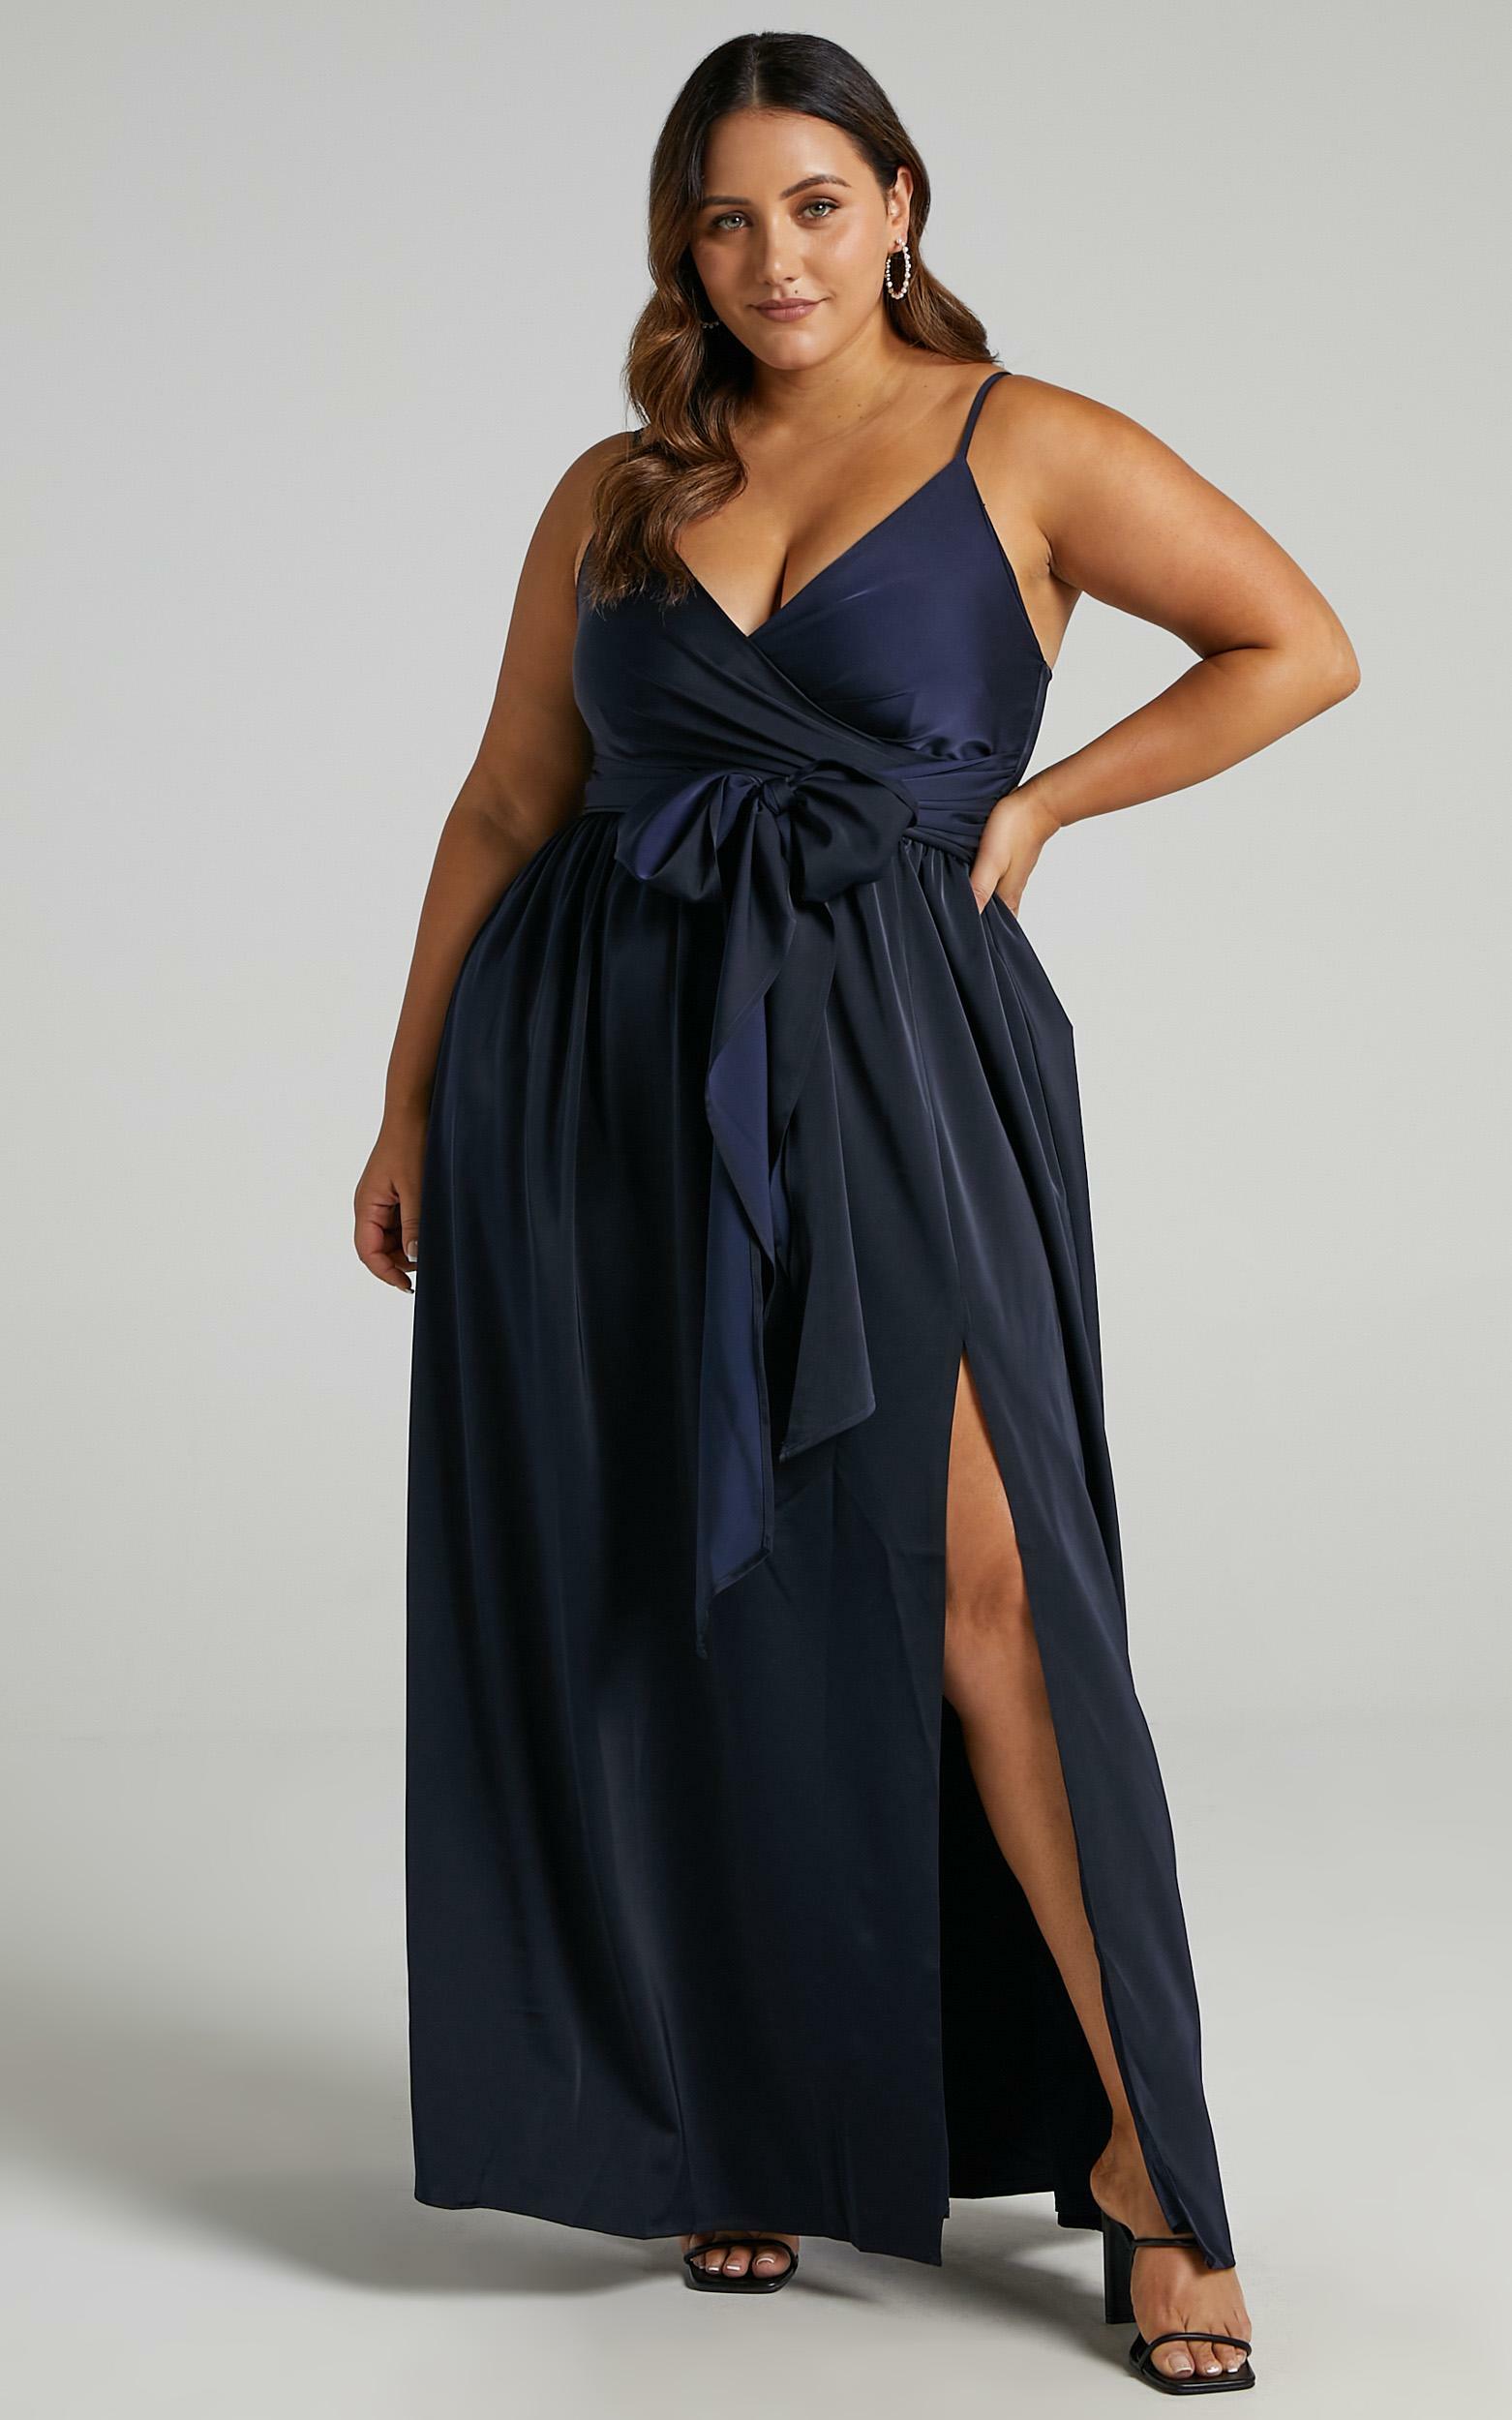 Revolve Around Me Dress in Navy - 20, NVY7, hi-res image number null